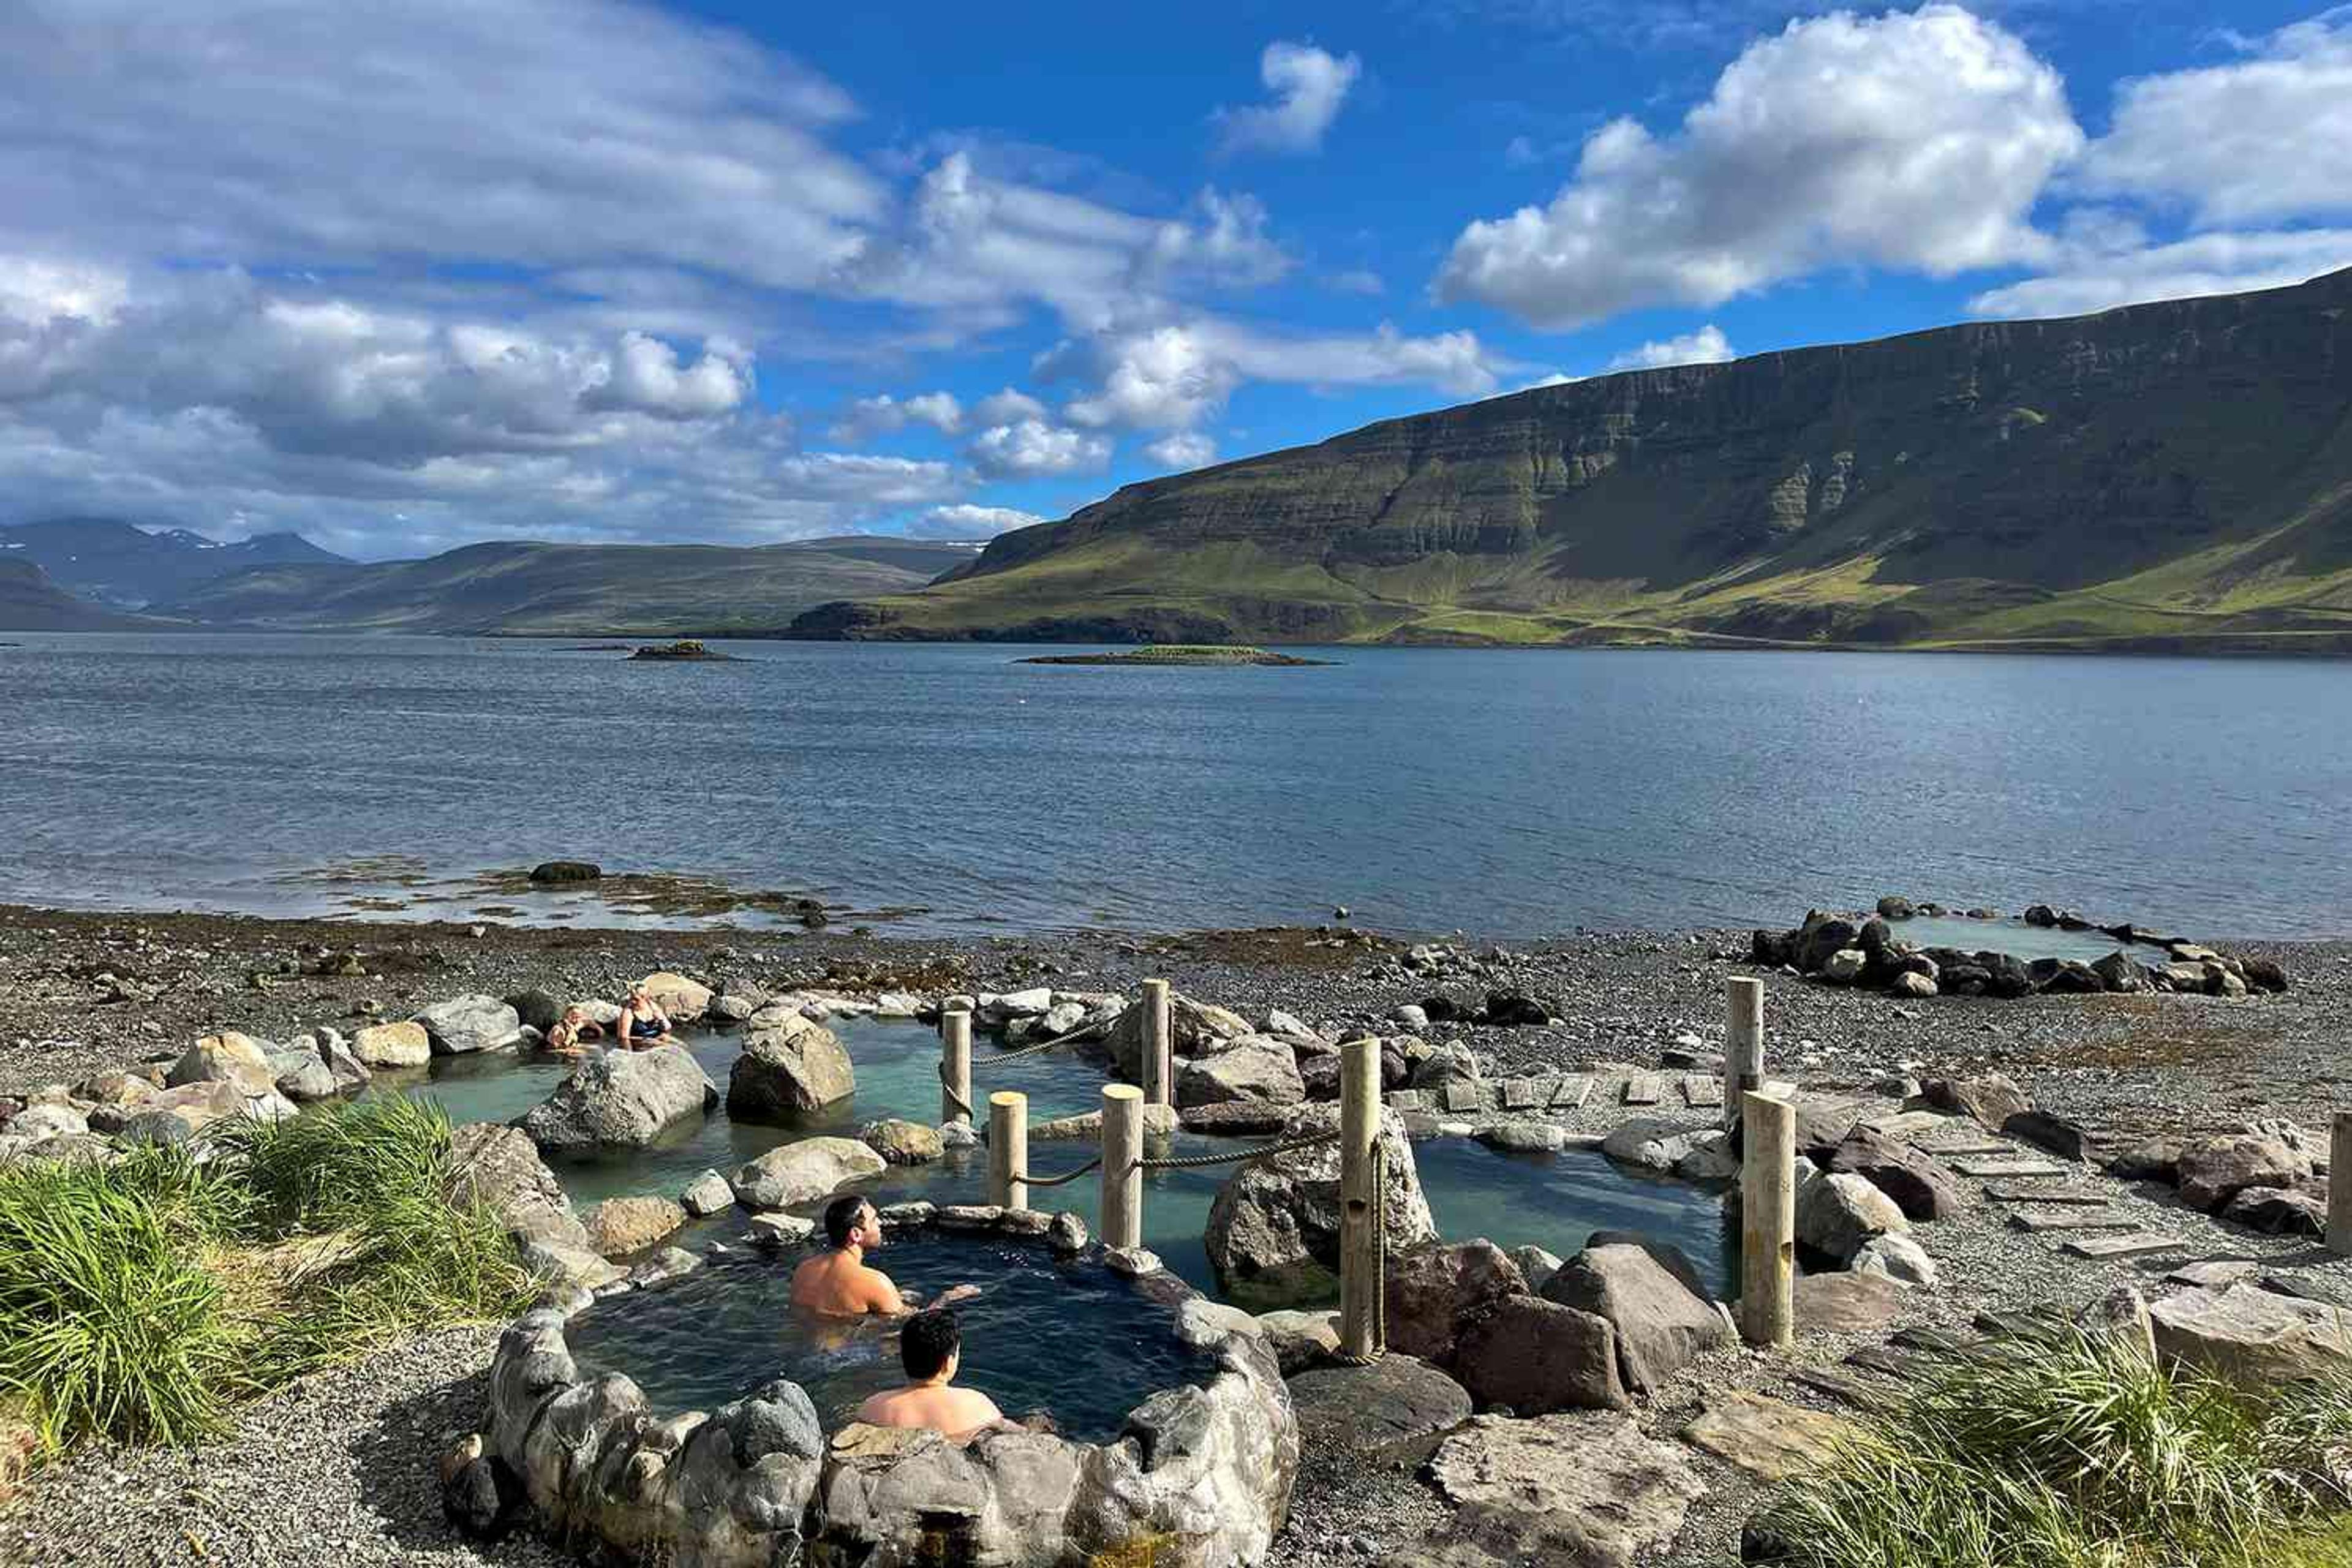 Two individuals enjoying the authentic warmth of Hvammsvík hot springs, nestled along the edge of a scenic fjord.